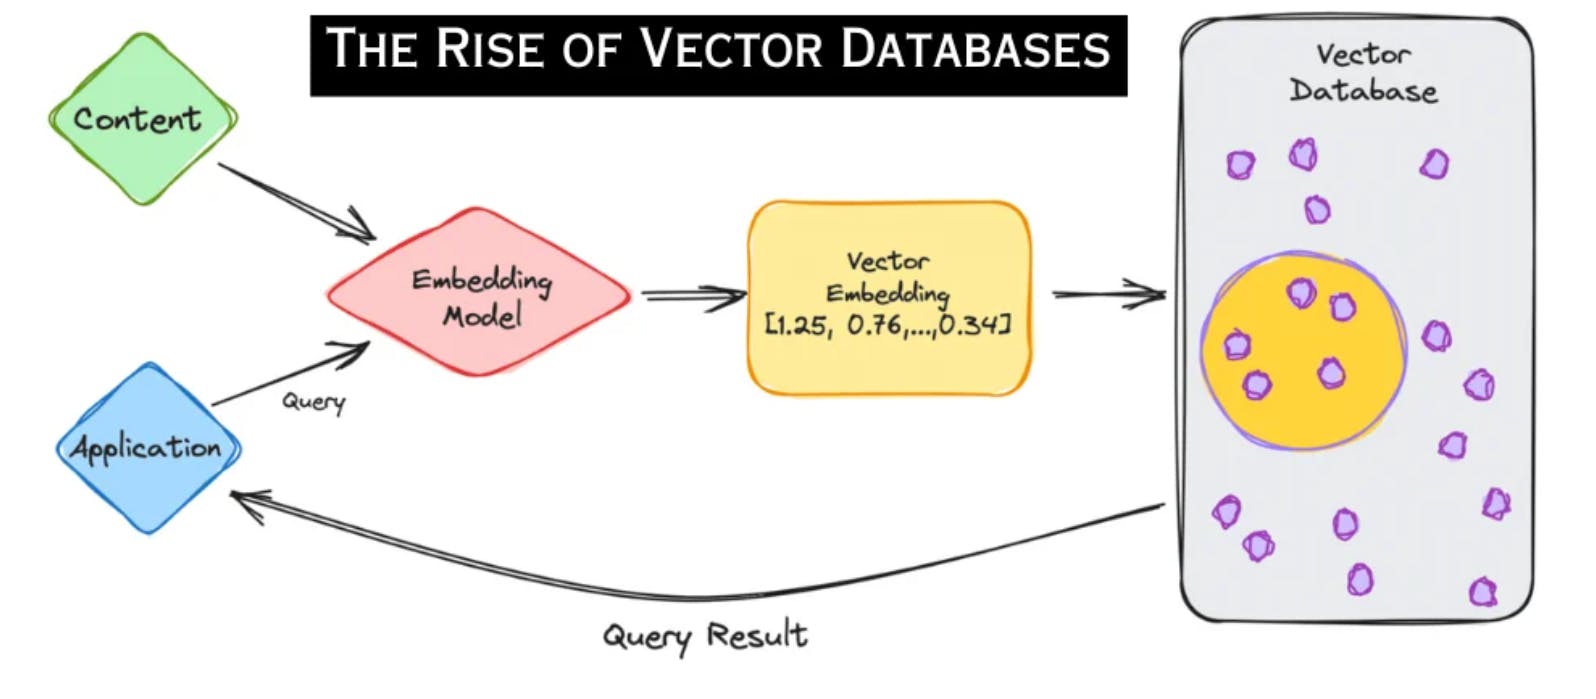 An image of vector databases featuring vector embedding and the embedding model.